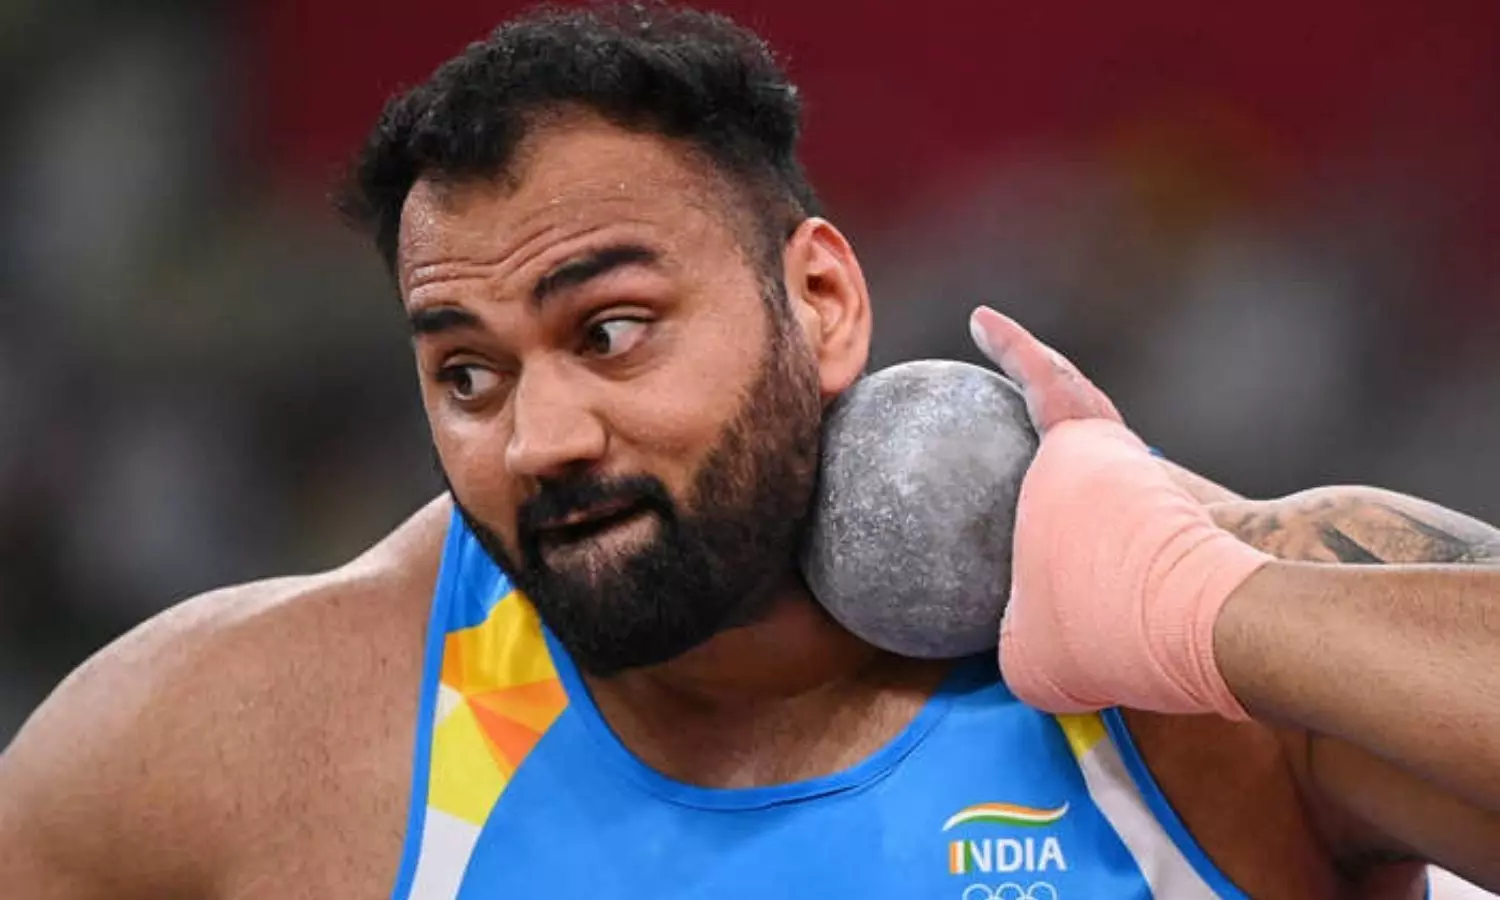 Tajinderpal Singh Toor betters Asian record in shot put to qualify for Asian Games, 70 others make cut